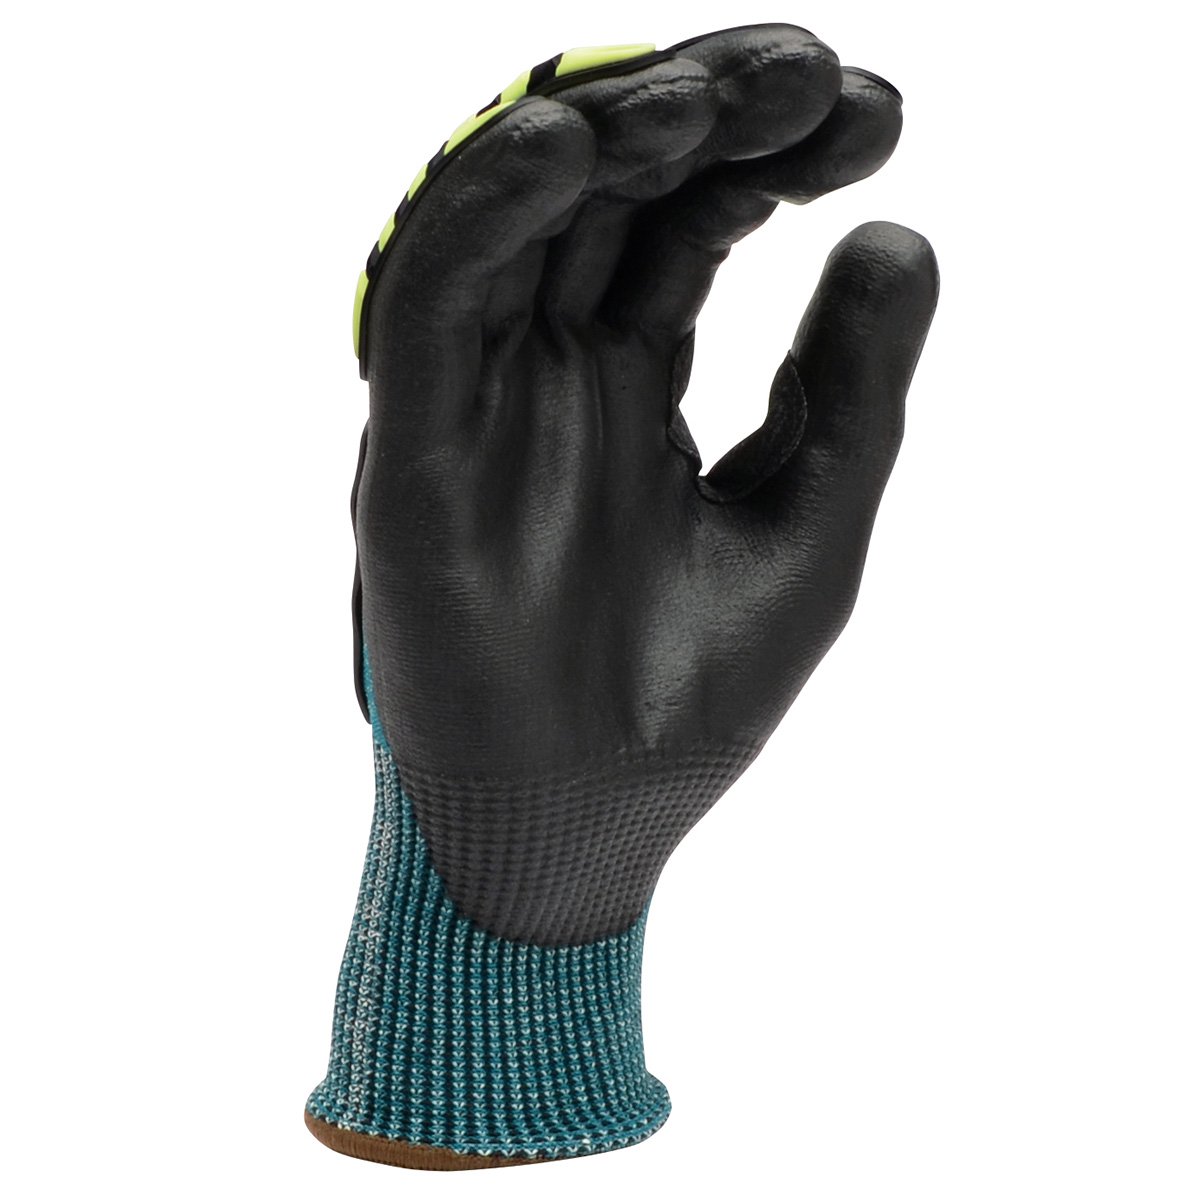 https://www.walkersgameear.com/wp-content/uploads/sites/4/2021/06/walkers-impact-and-cut-resistant-gloves-palm.jpg